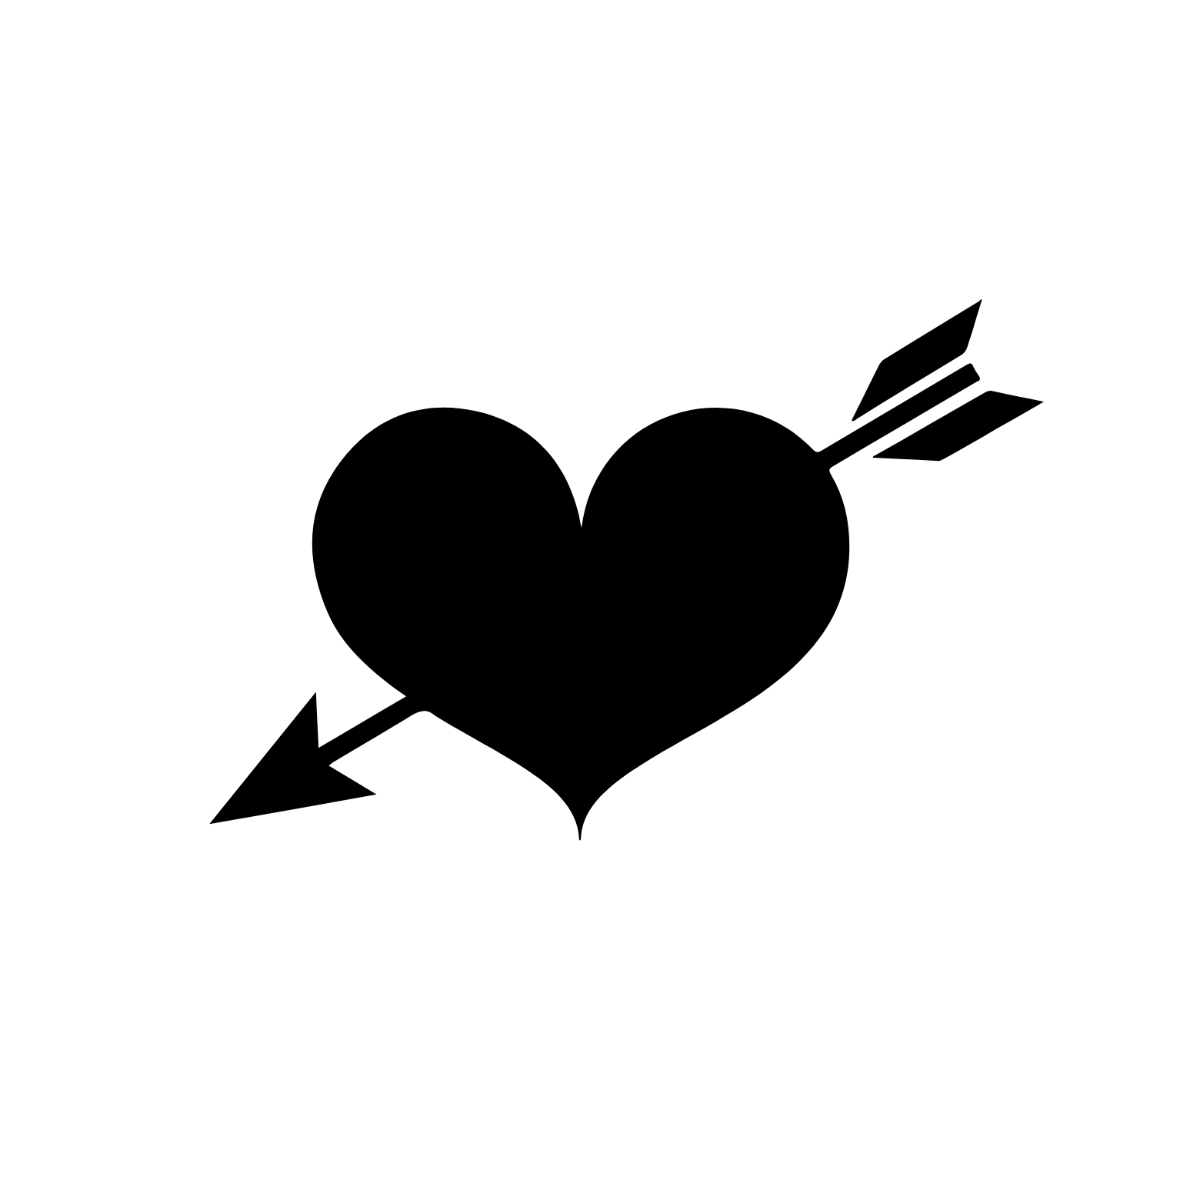 Free Black Heart with Arrow Silhouette Template